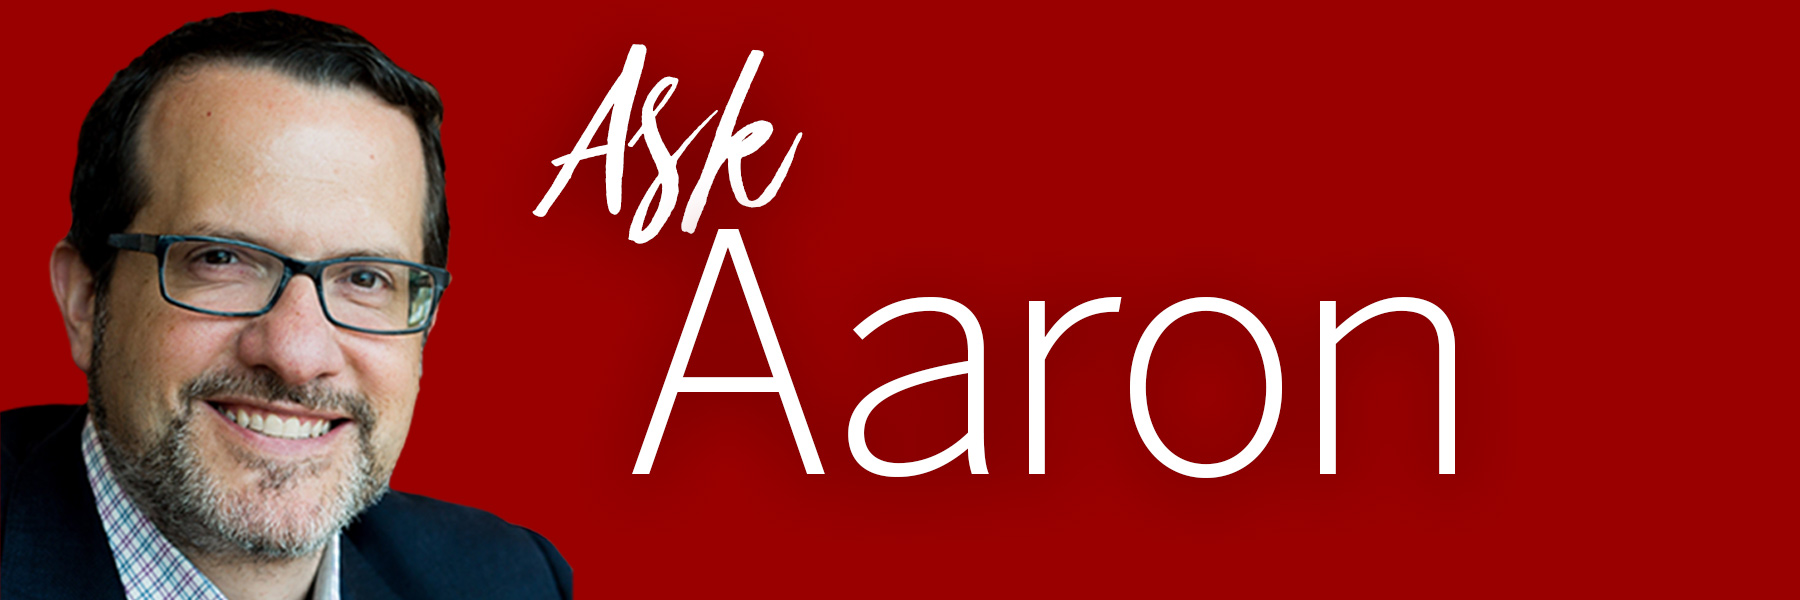 Ask Aaron branded graphic with Dr. Carroll's headshot